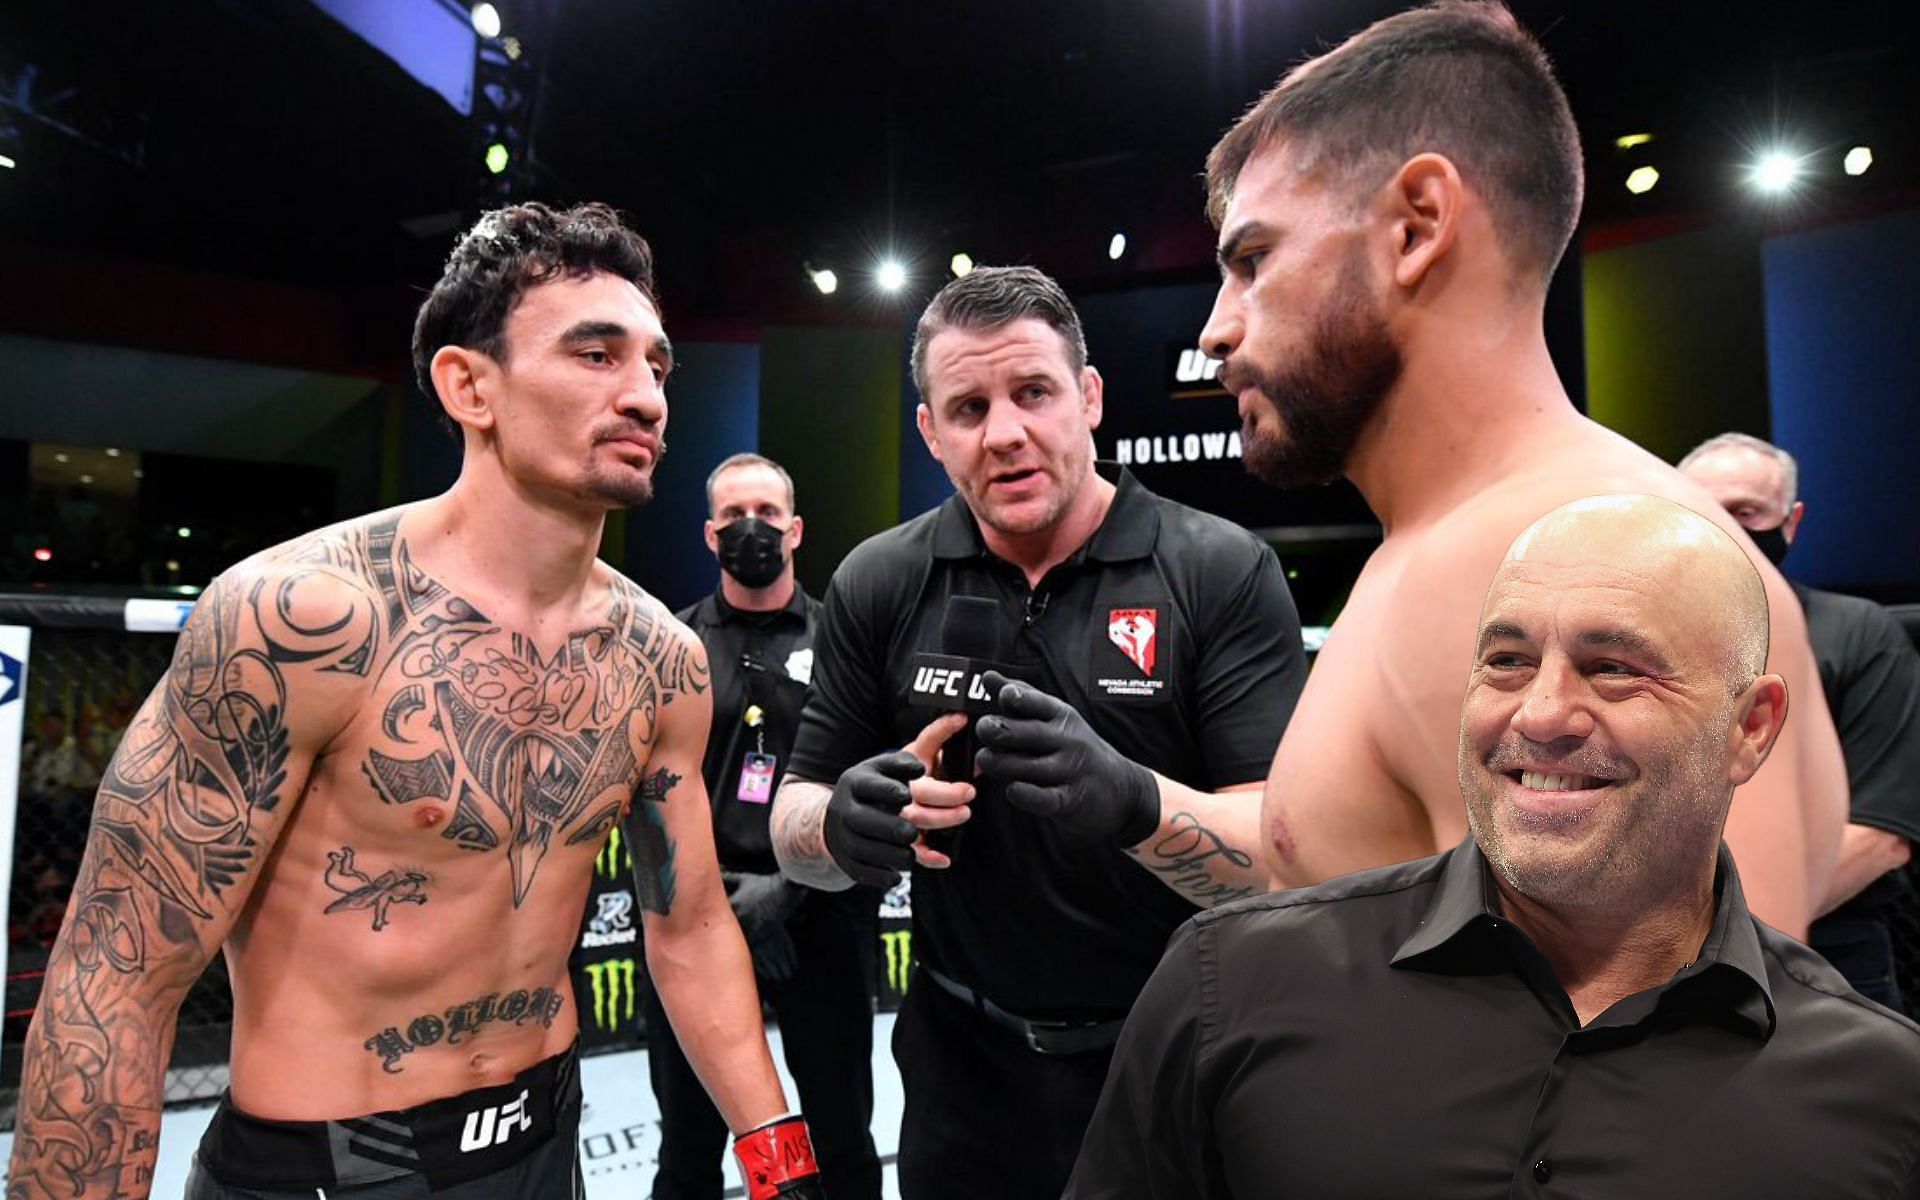 Max Holloway (left), Yair Rodriguez (right), and Joe Rogan (bottom right) (Images via Getty and Twitter/@UFC)